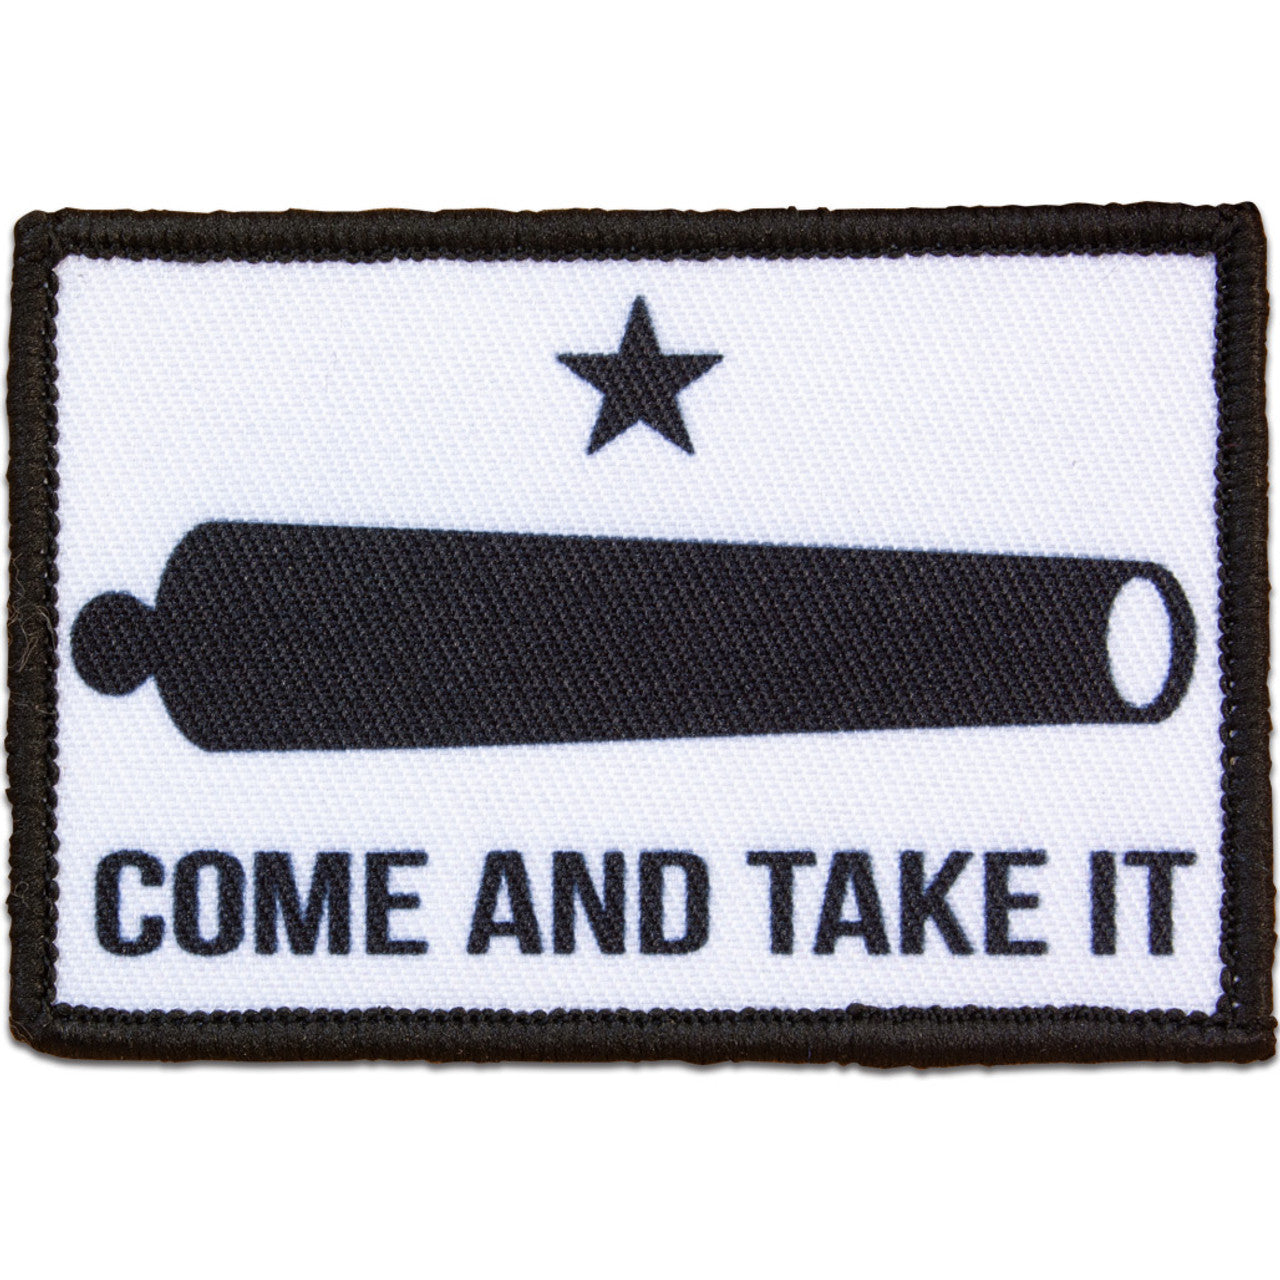 "COME AND TAKE IT" CANNON MORALE PATCH